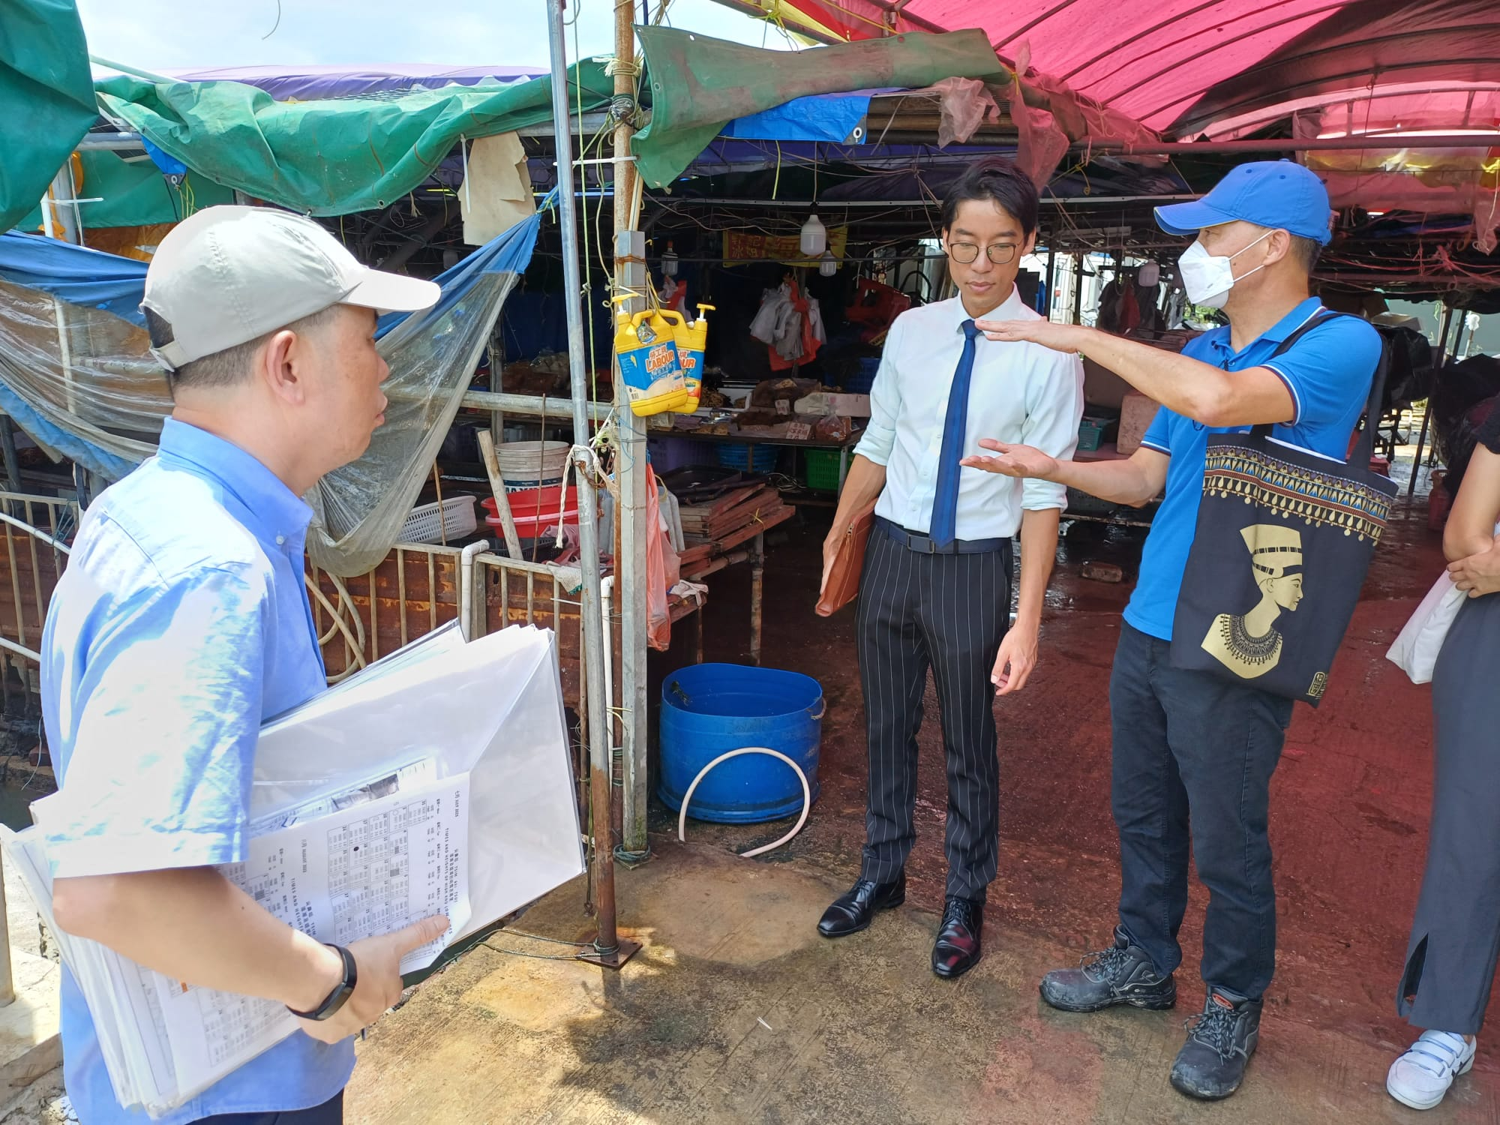 The District Officer (Yuen Long), Mr Gordon Wu, and other staff members from the Yuen Long District Office inspected seawater intrusion black spot in low-lying areas in Lau Fau Shan, to better understand the precautionary measures against typhoon and flooding taken by nearby residents and shop owners. Photo shows Mr Wu (centre) and other government representatives discussing the rise of coastal water level.